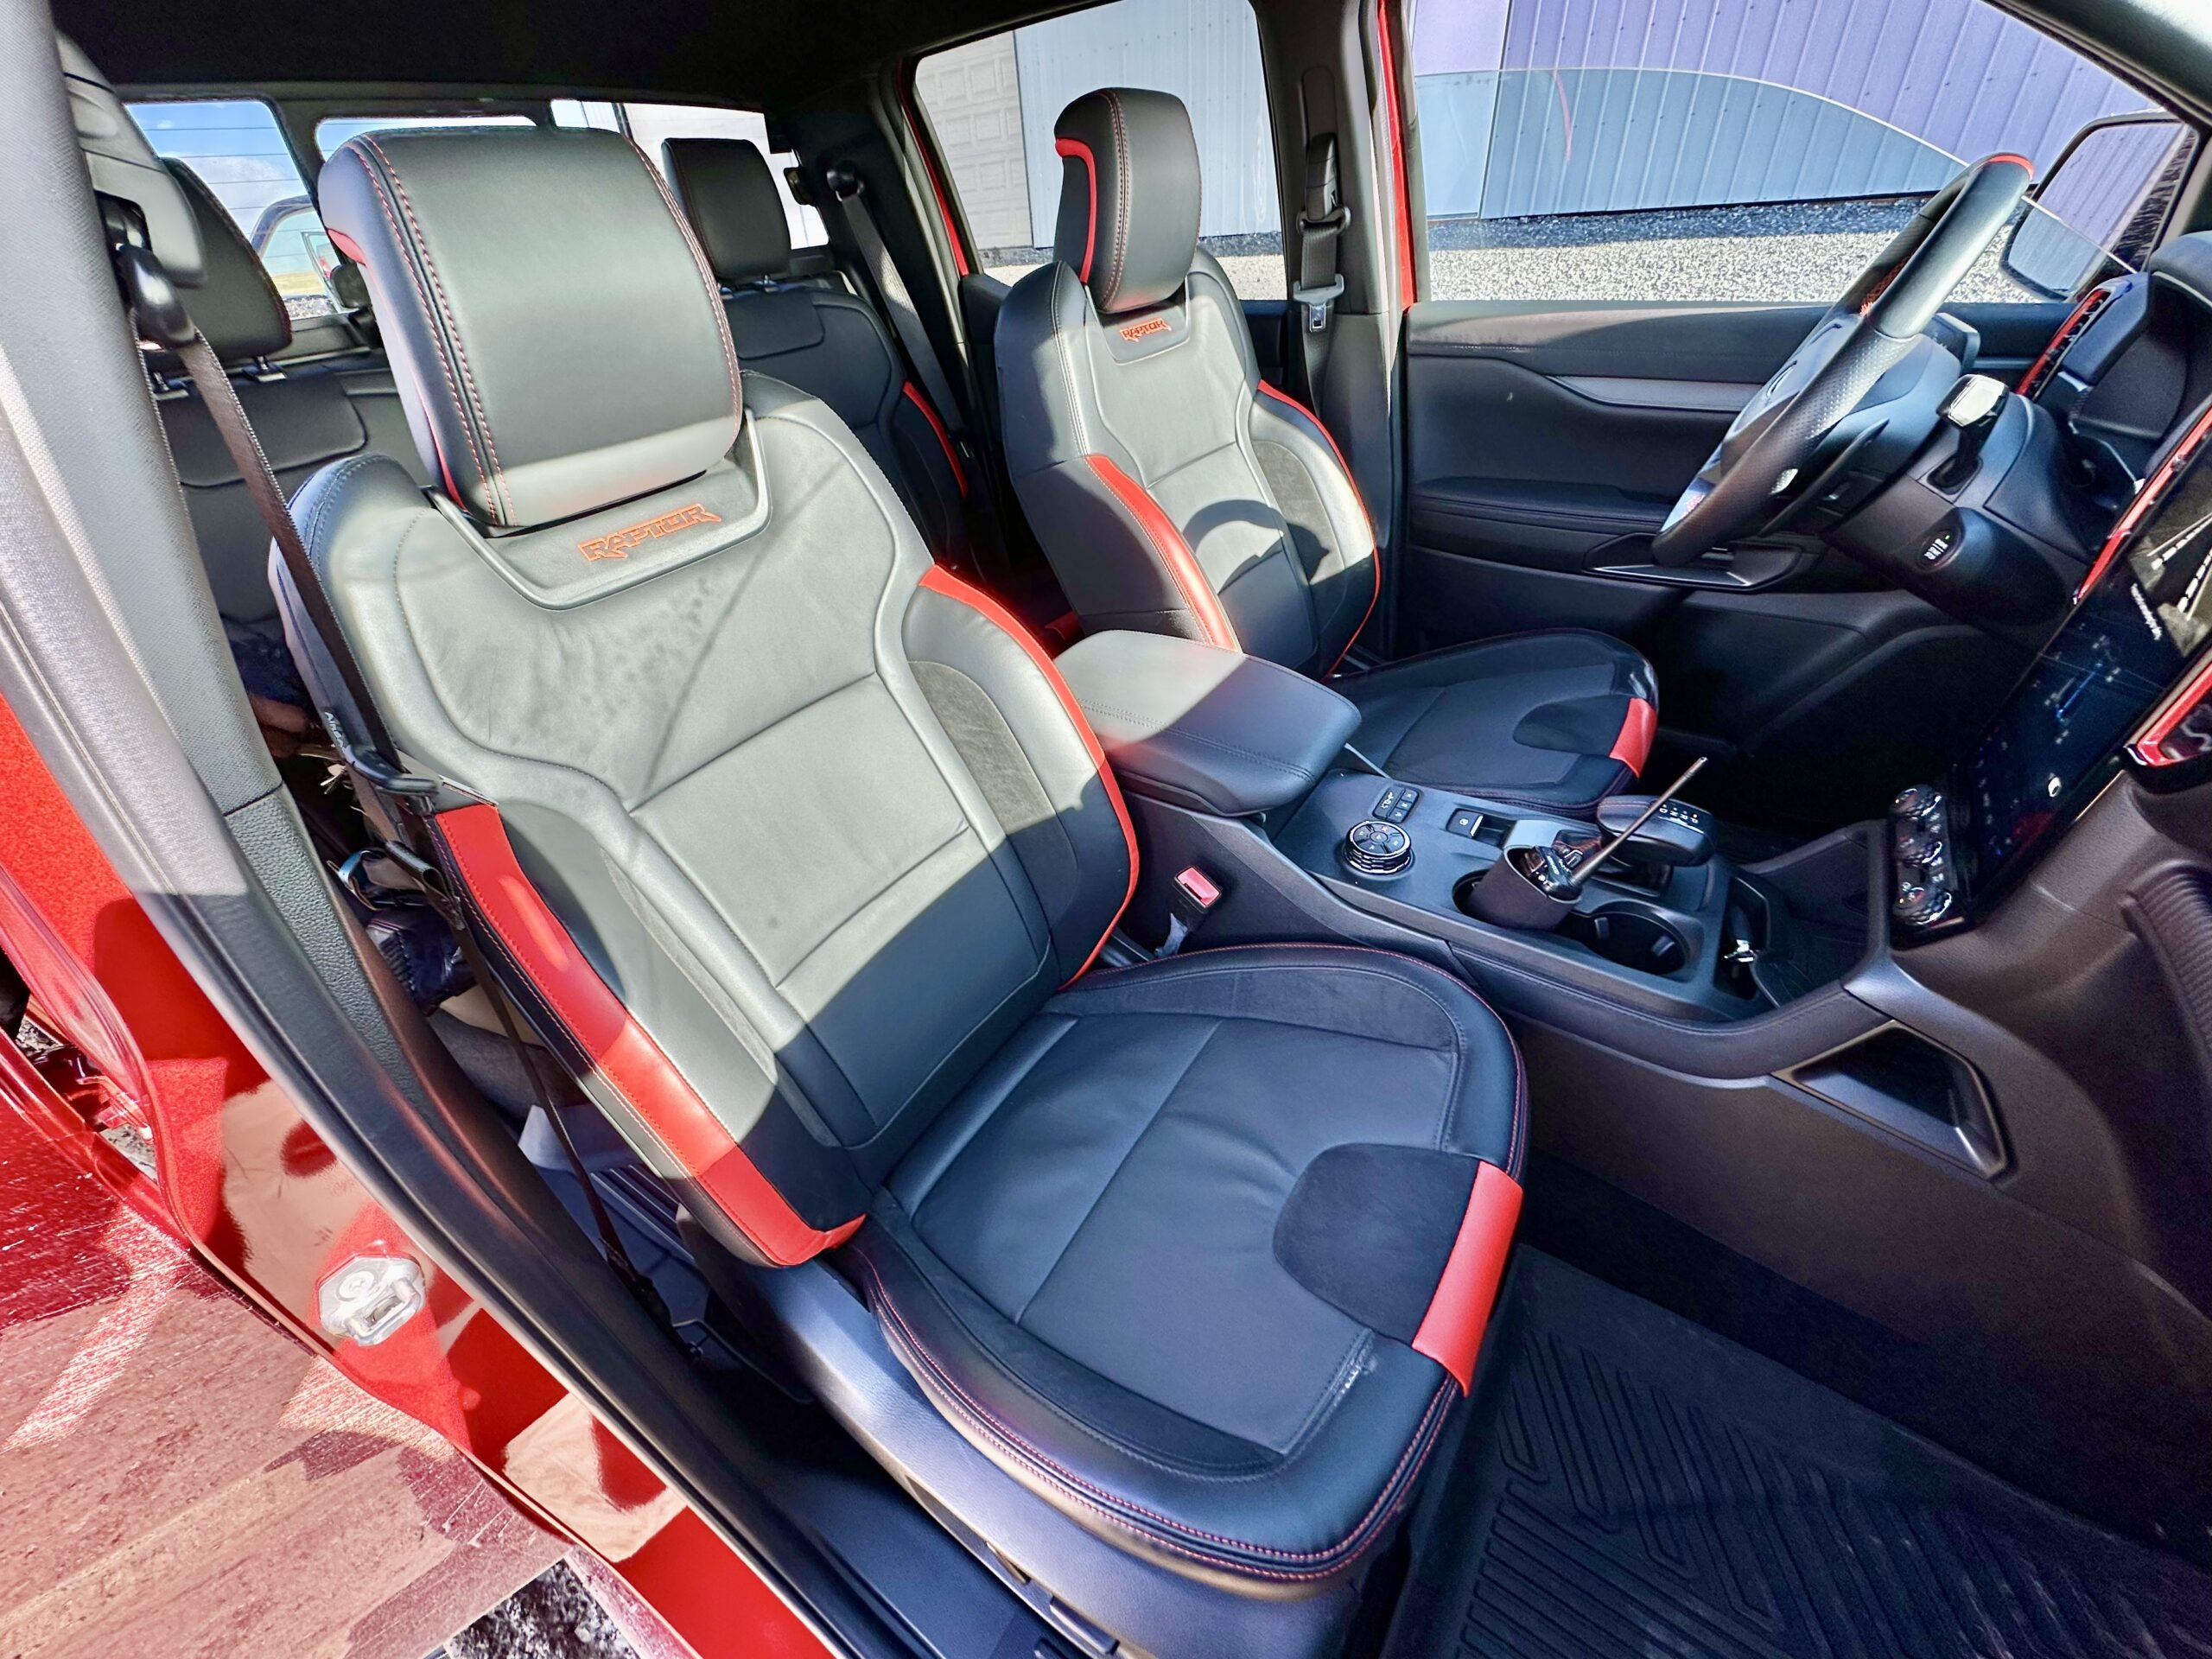 Ford Performance bucket seats with Code Orange accents